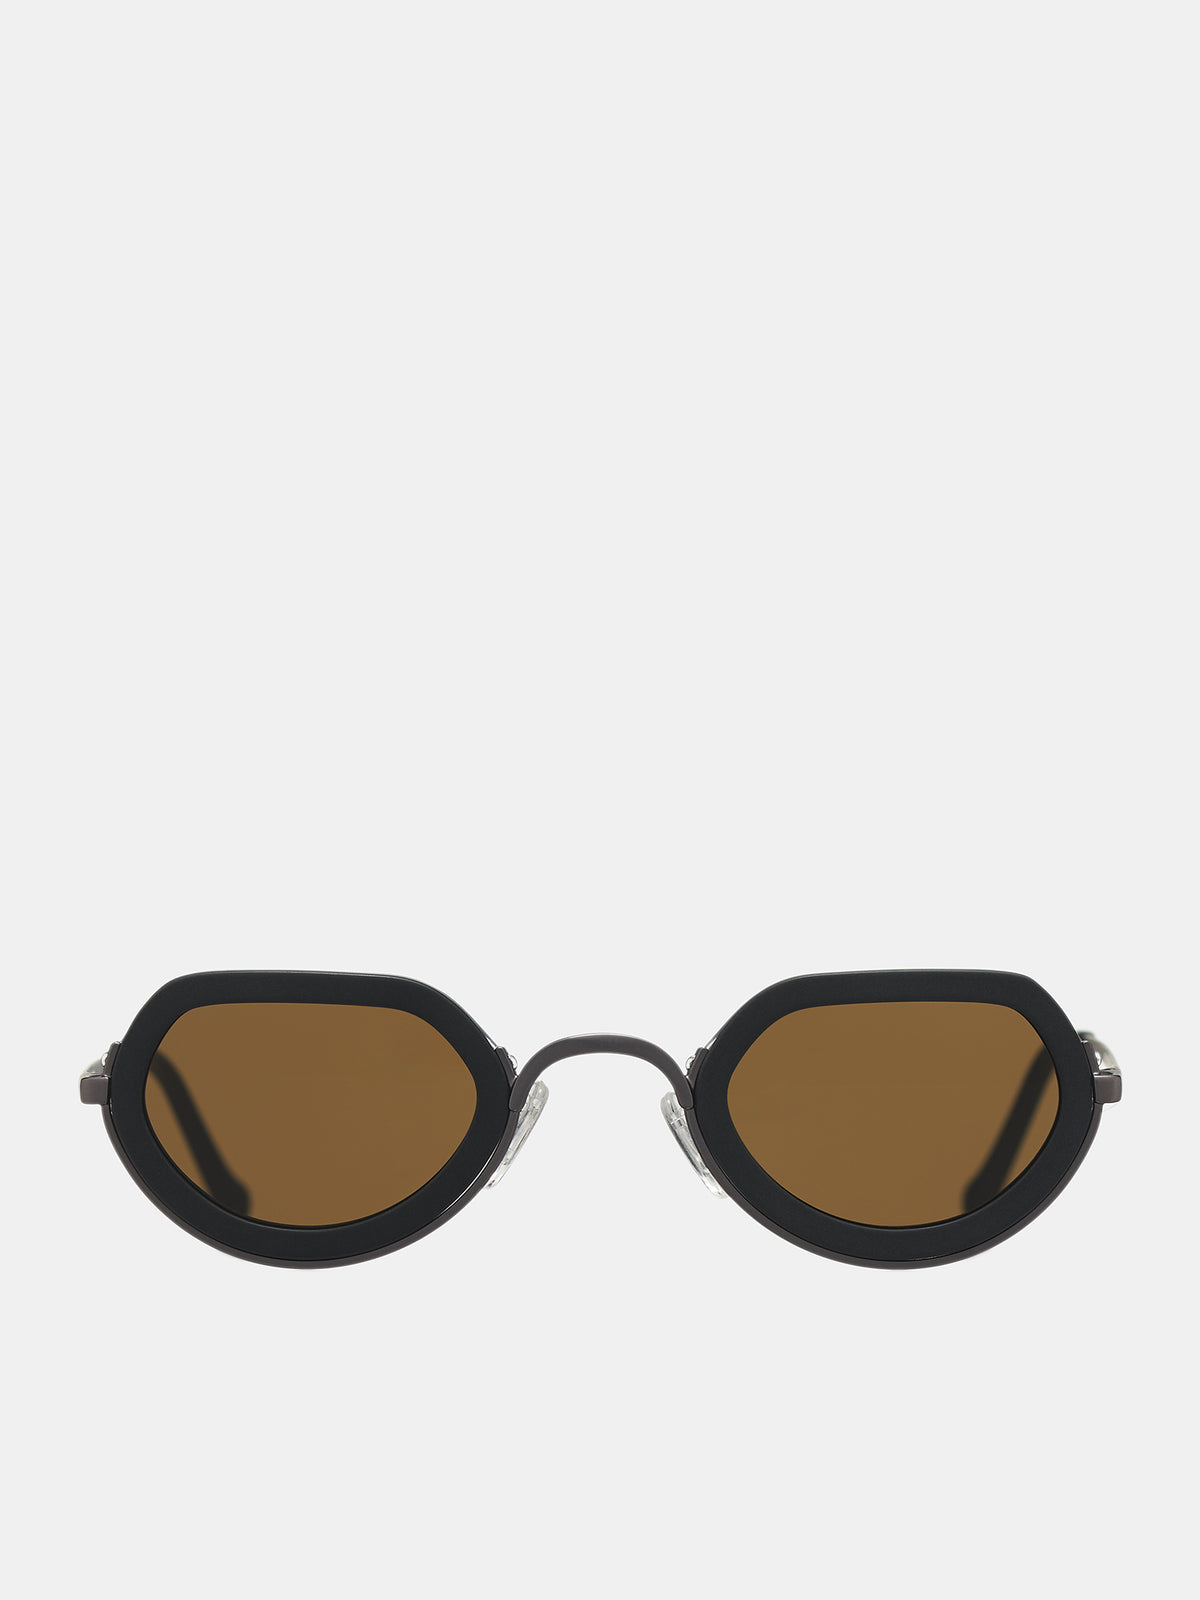 DISTRICT PEOPLE Poipet 001 Sunglasses | H. Lorenzo - front